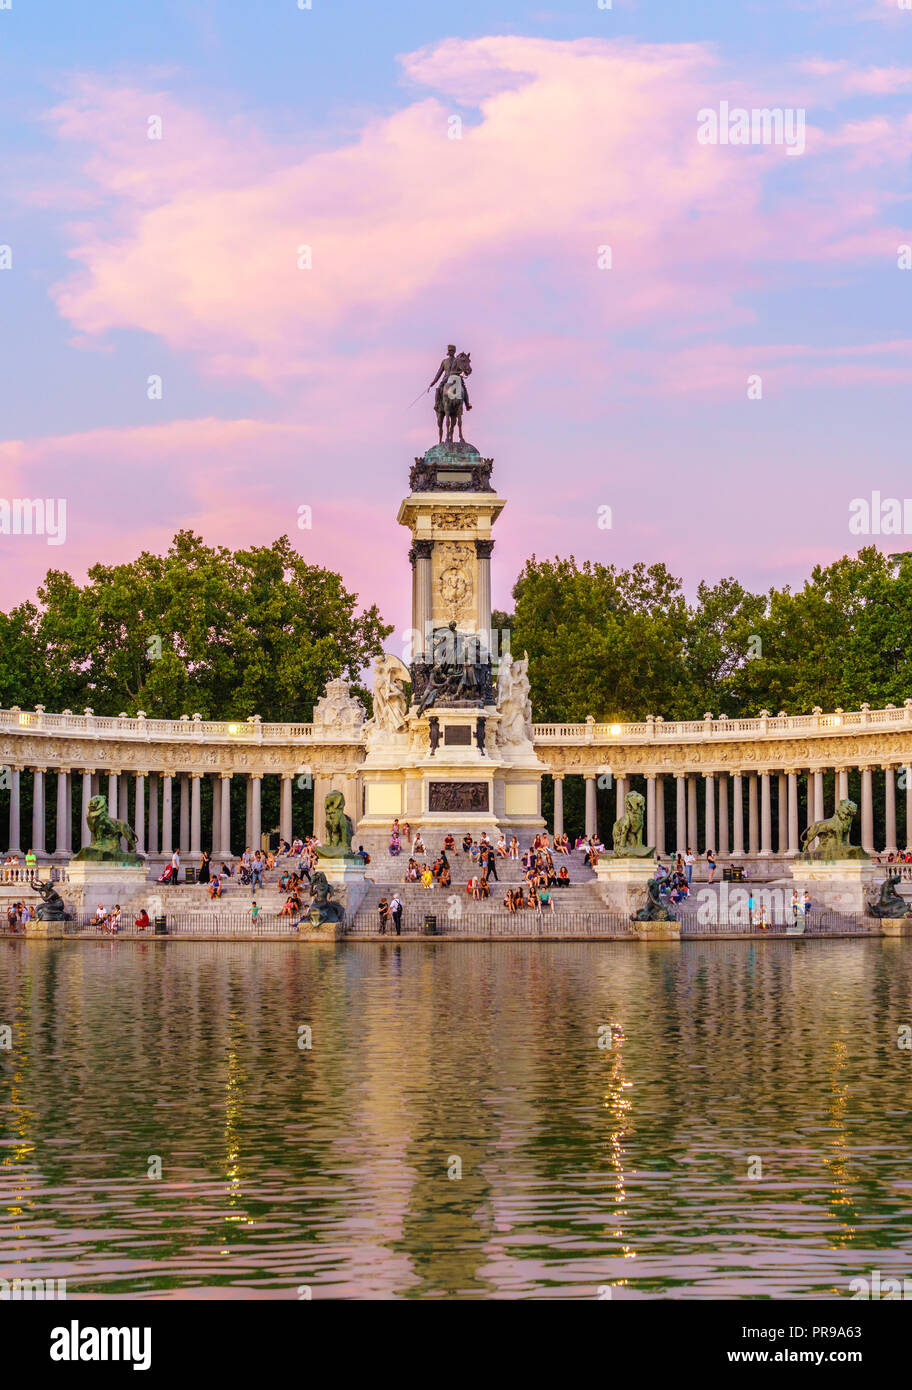 The Retiro Park is located downtown Madrid, Spain. It belonged to the Spanish Monarchy until the late 19th century, now it is a public park. Stock Photo